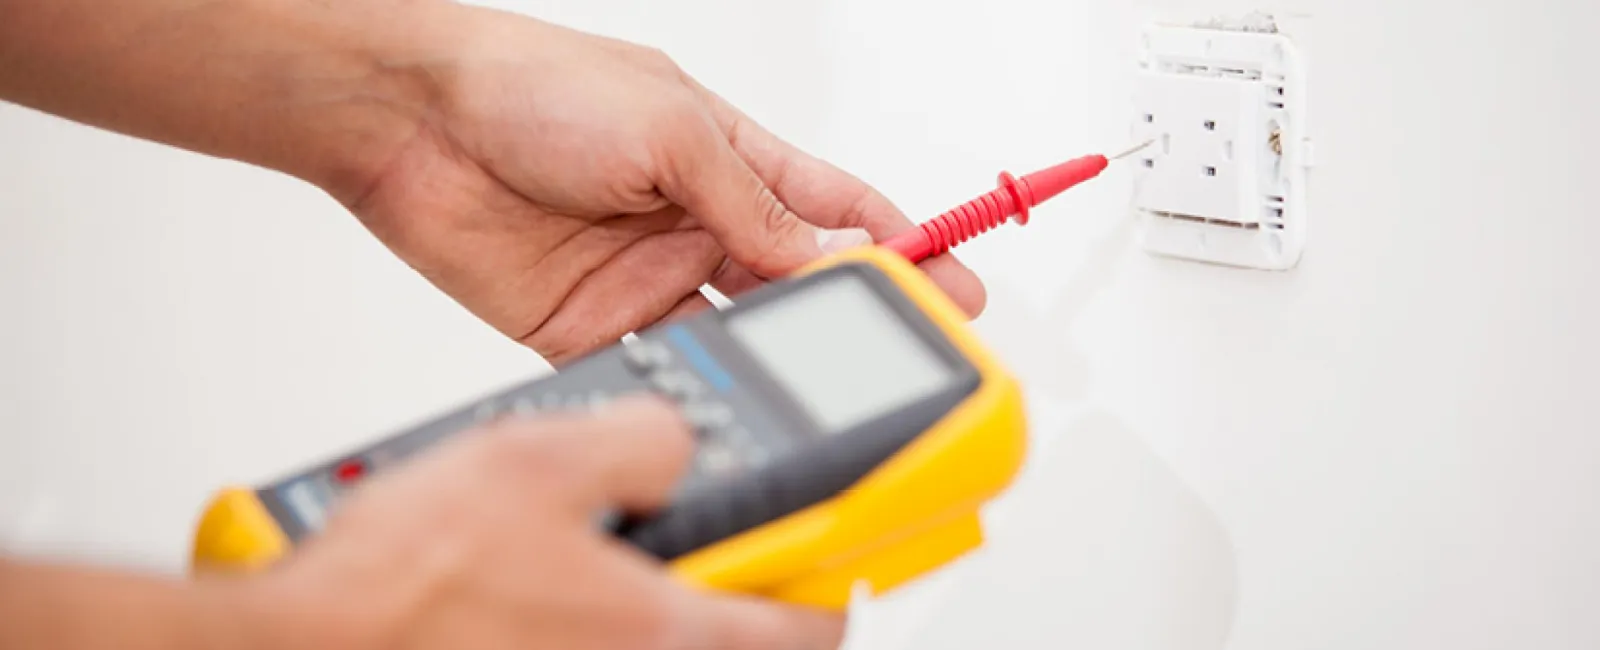 How to Use A Multimeter To Test An Outlet.